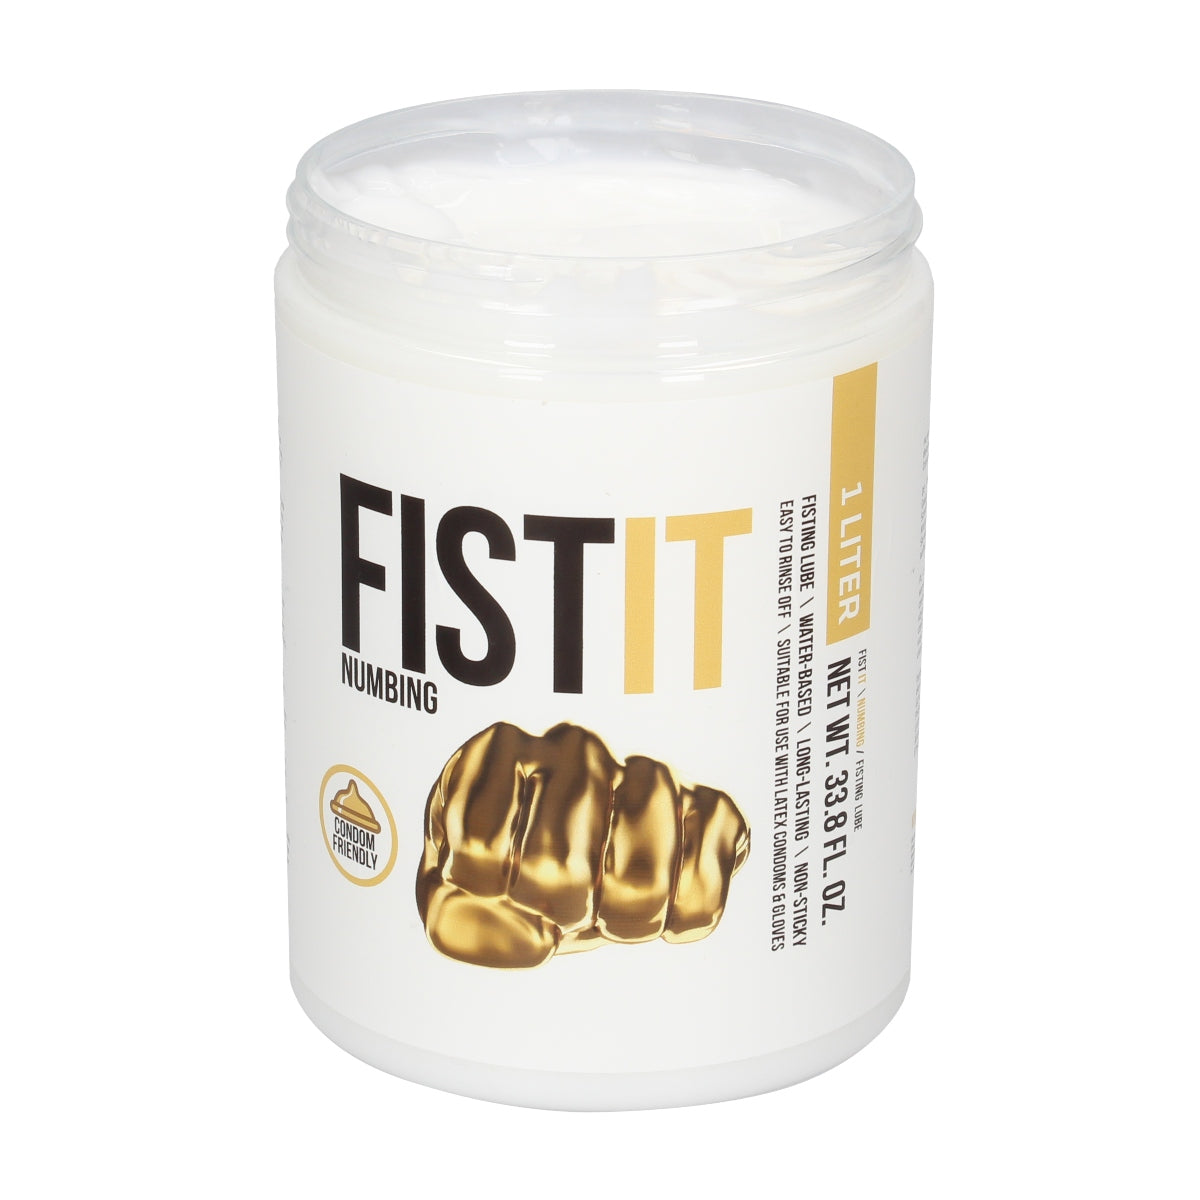 Fist It Numbing Lubricant (8212586823919)